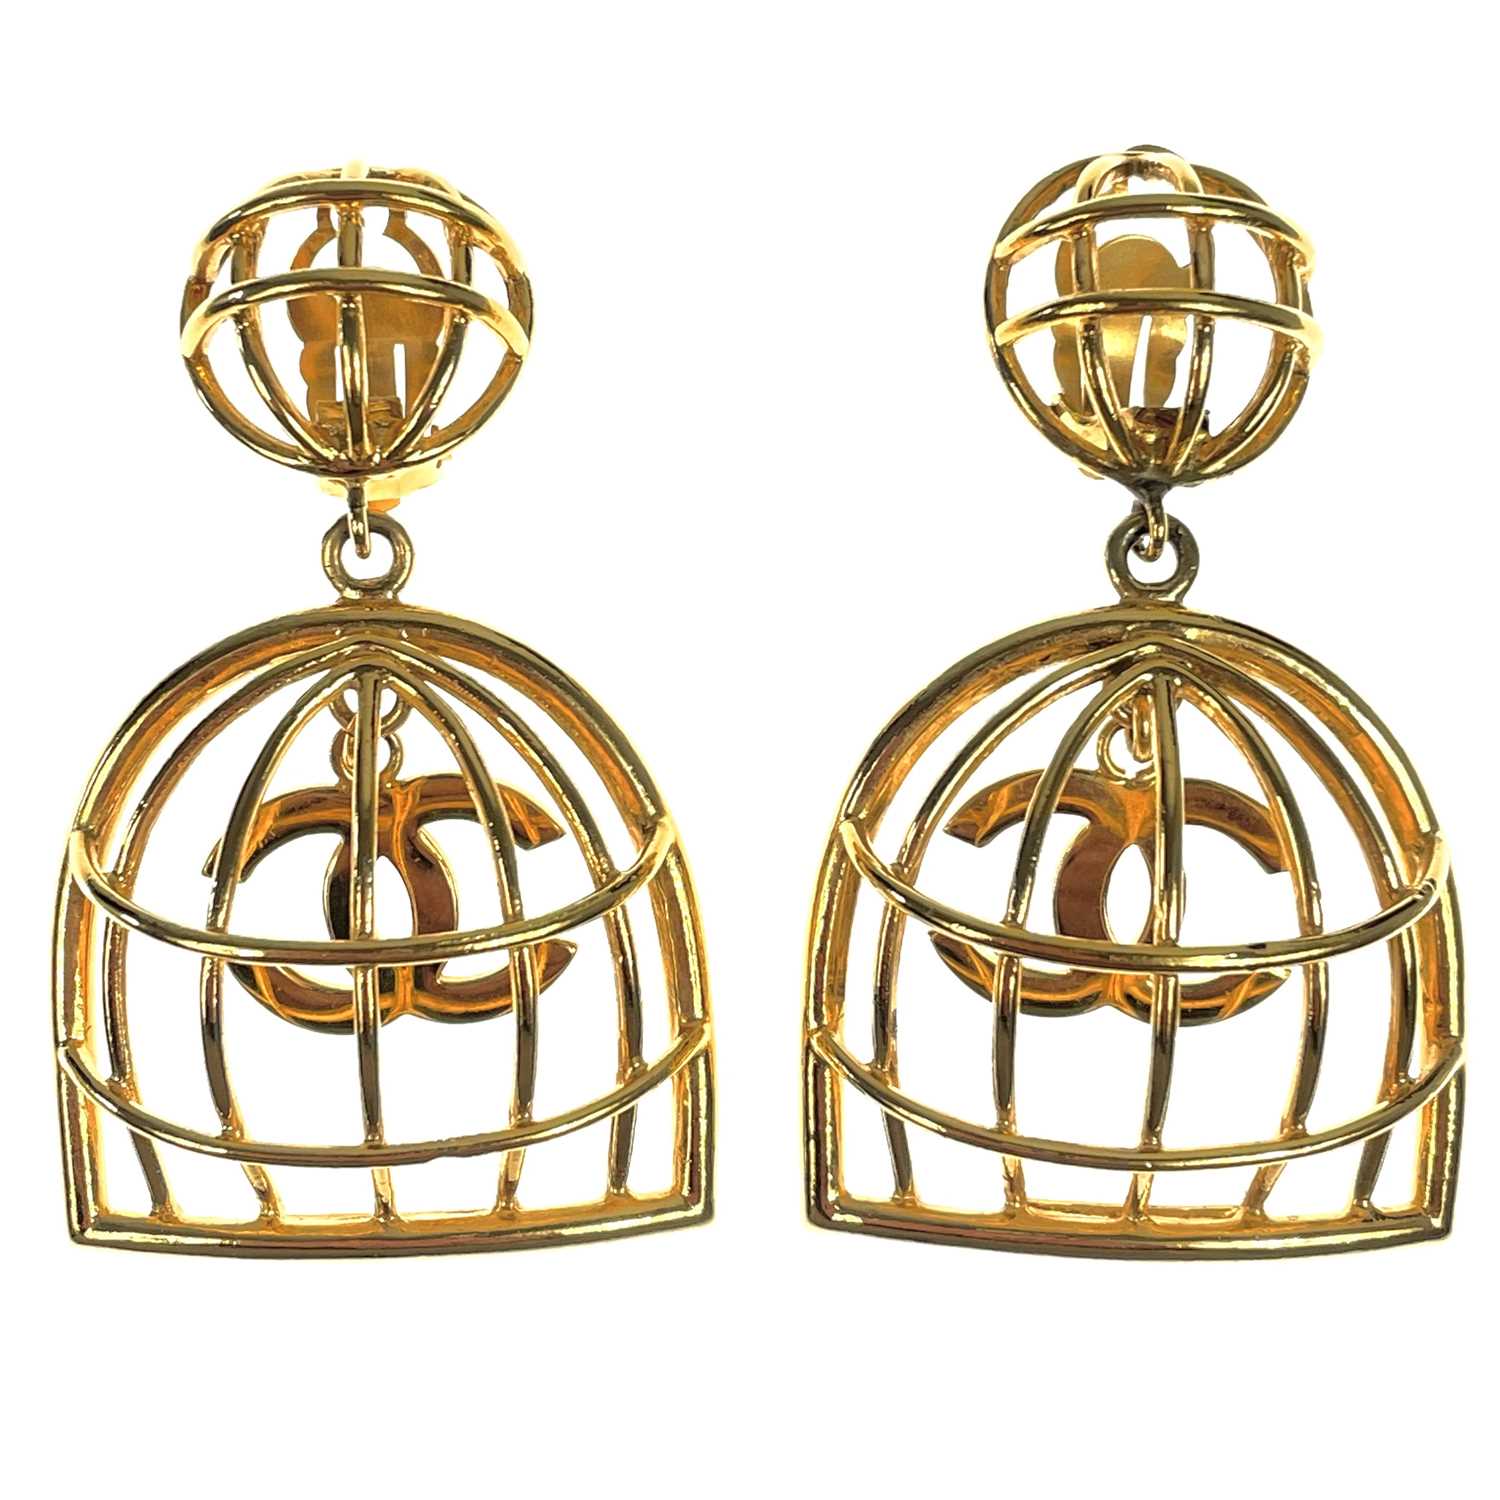 Chanel Vintage Chanel Gold-tone Bird Cage & CC Logo Earrings